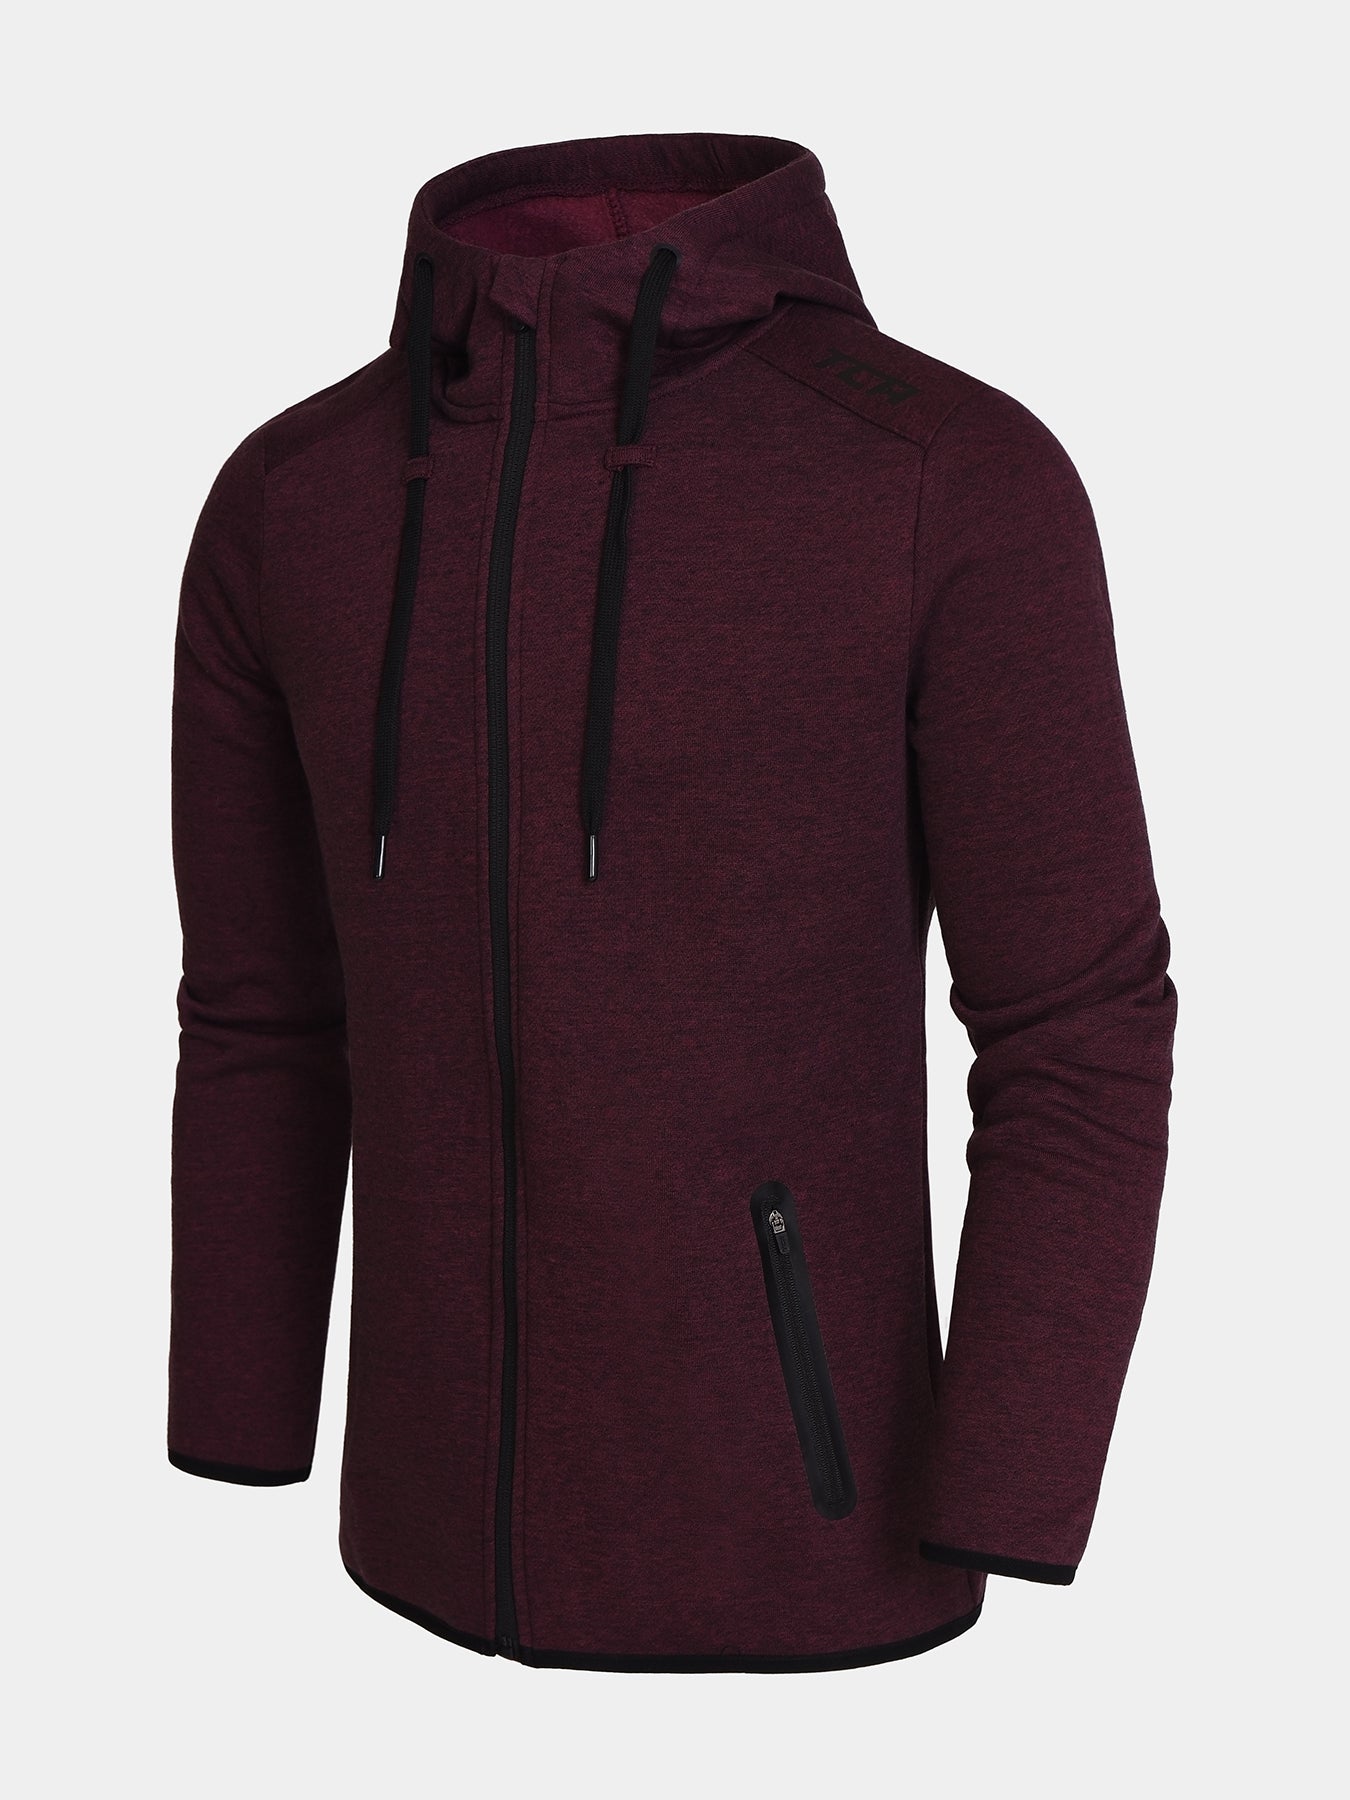 Revolution Tech Gym Running Hoodie For Men With Zip Pockets